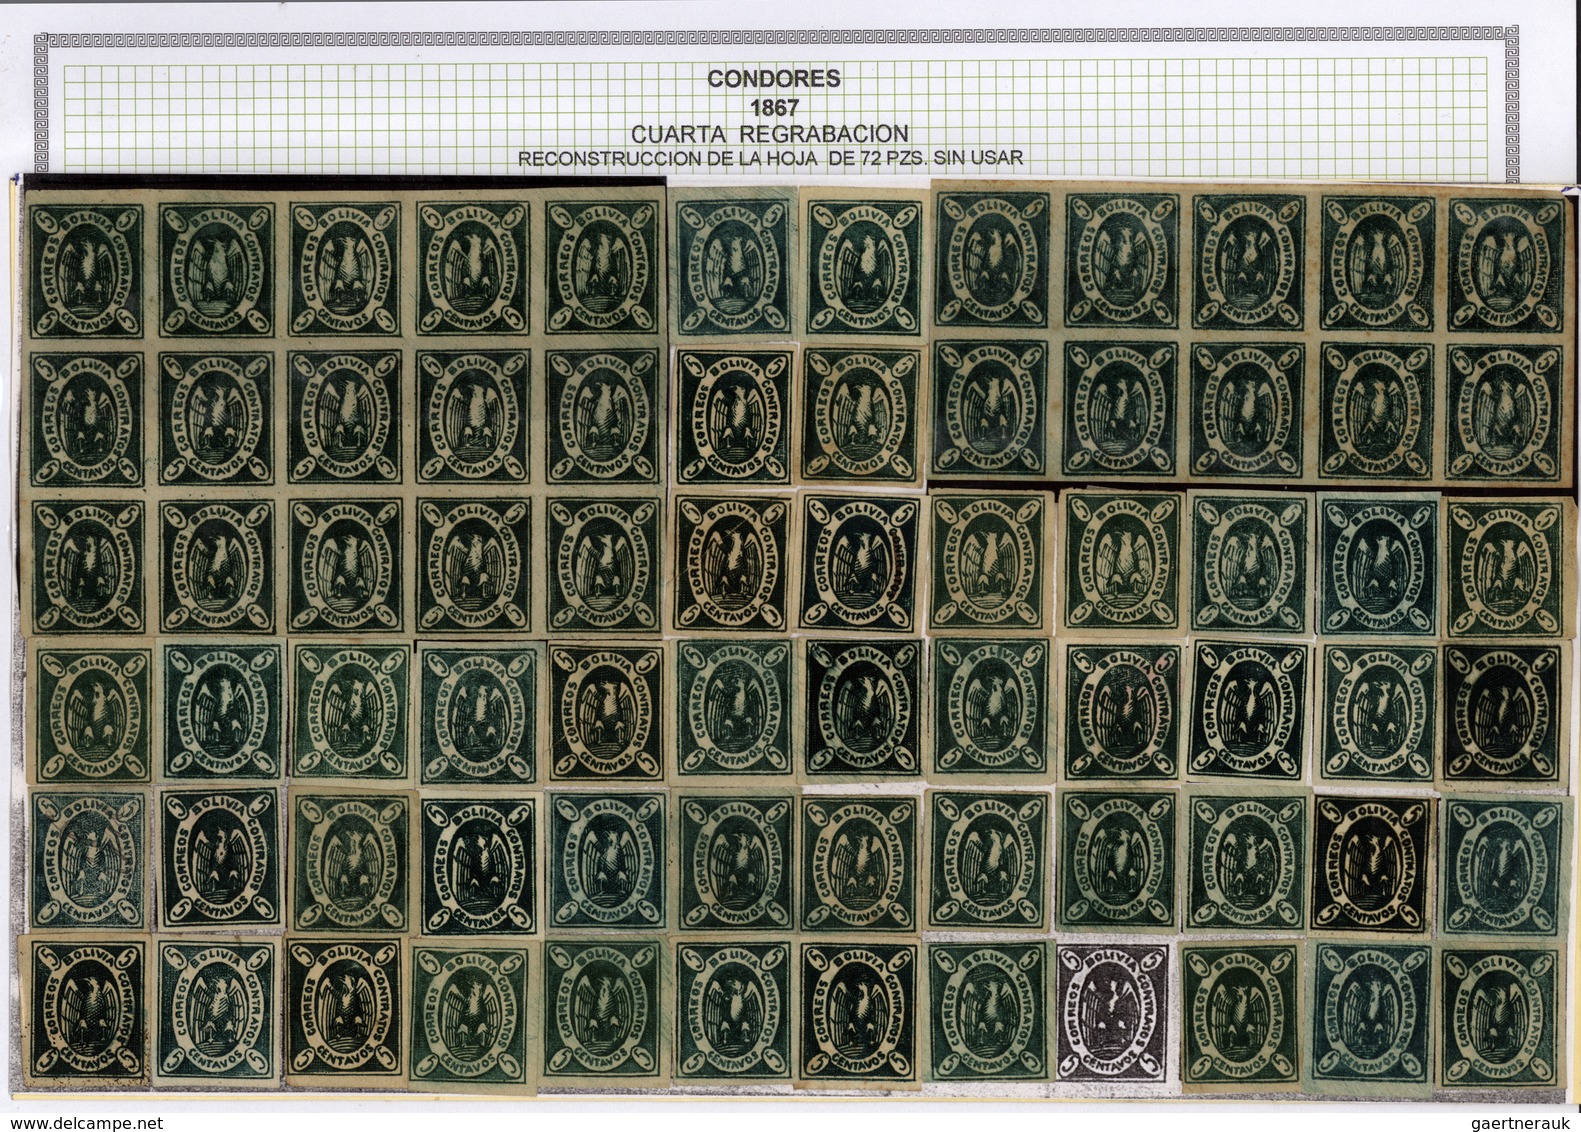 00565 Bolivien: 1867: THE CONDOR ISSUE: A scarce and unique special collection of a most exciting classica